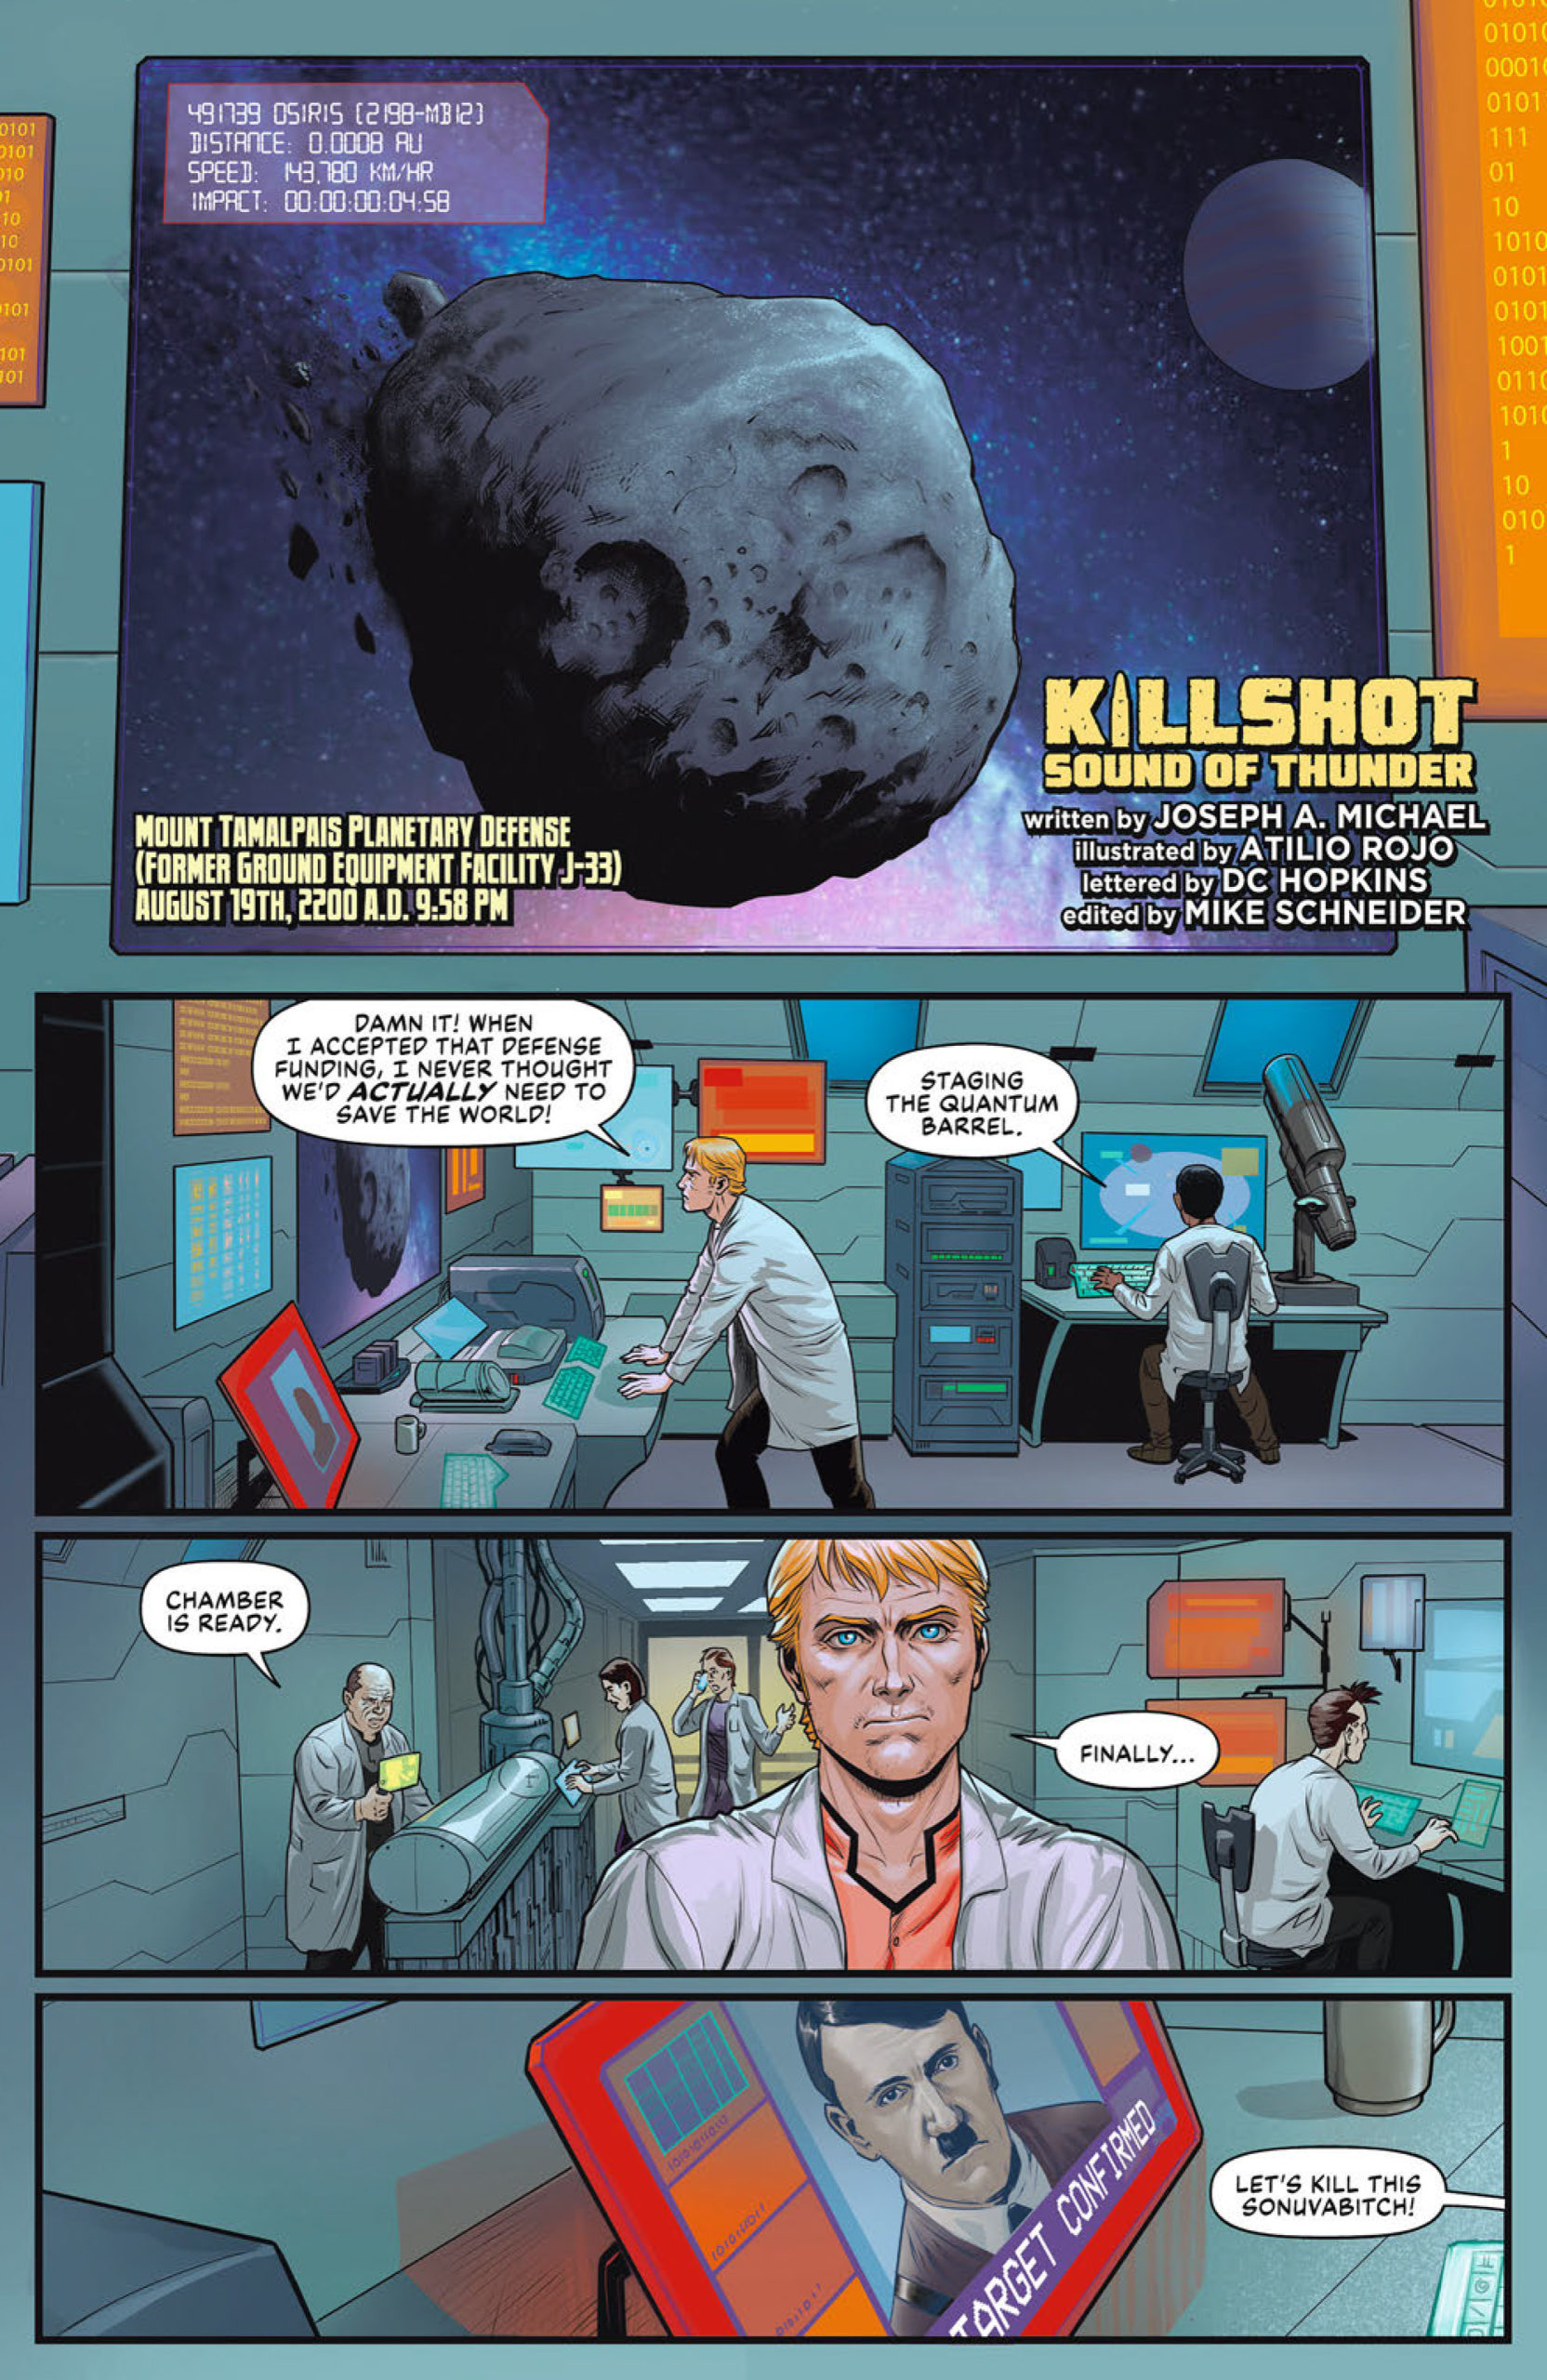 In the first page of Killshot, scientists prepare to kill Hitler.